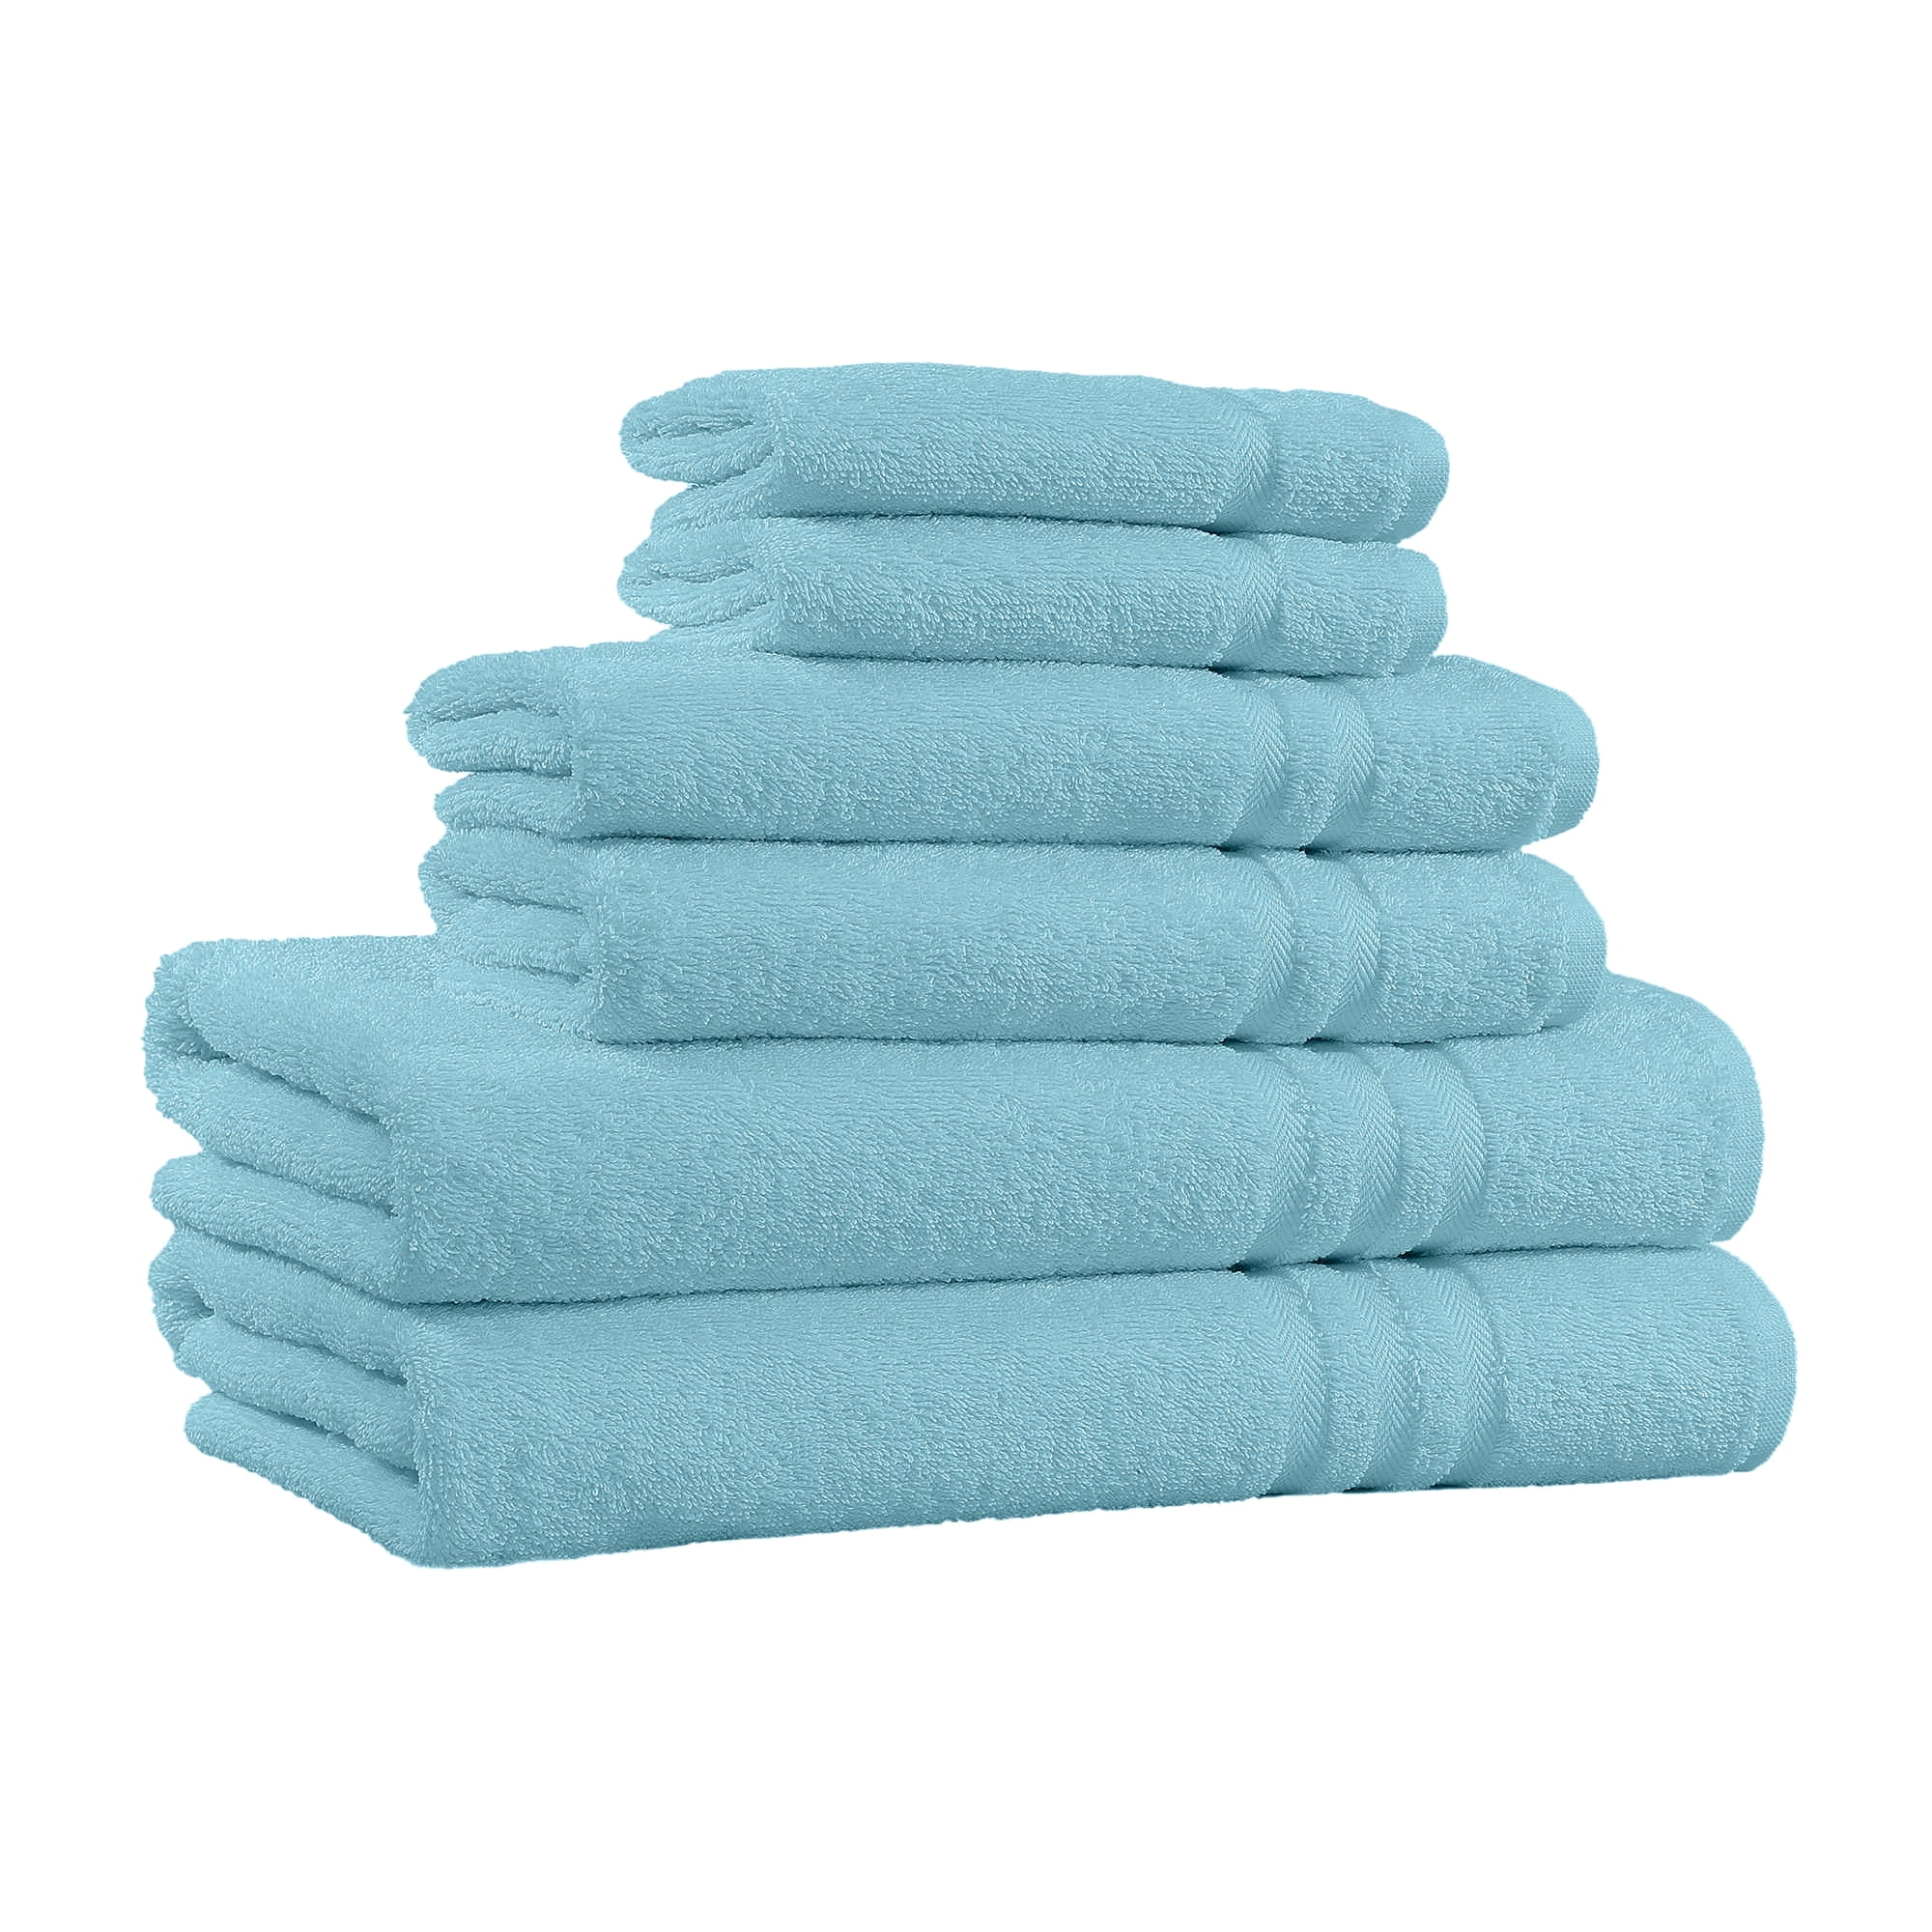 Luxury 100% Egyptian Cotton Thick Heavyweight Combed Turquoise Towels and Mats 